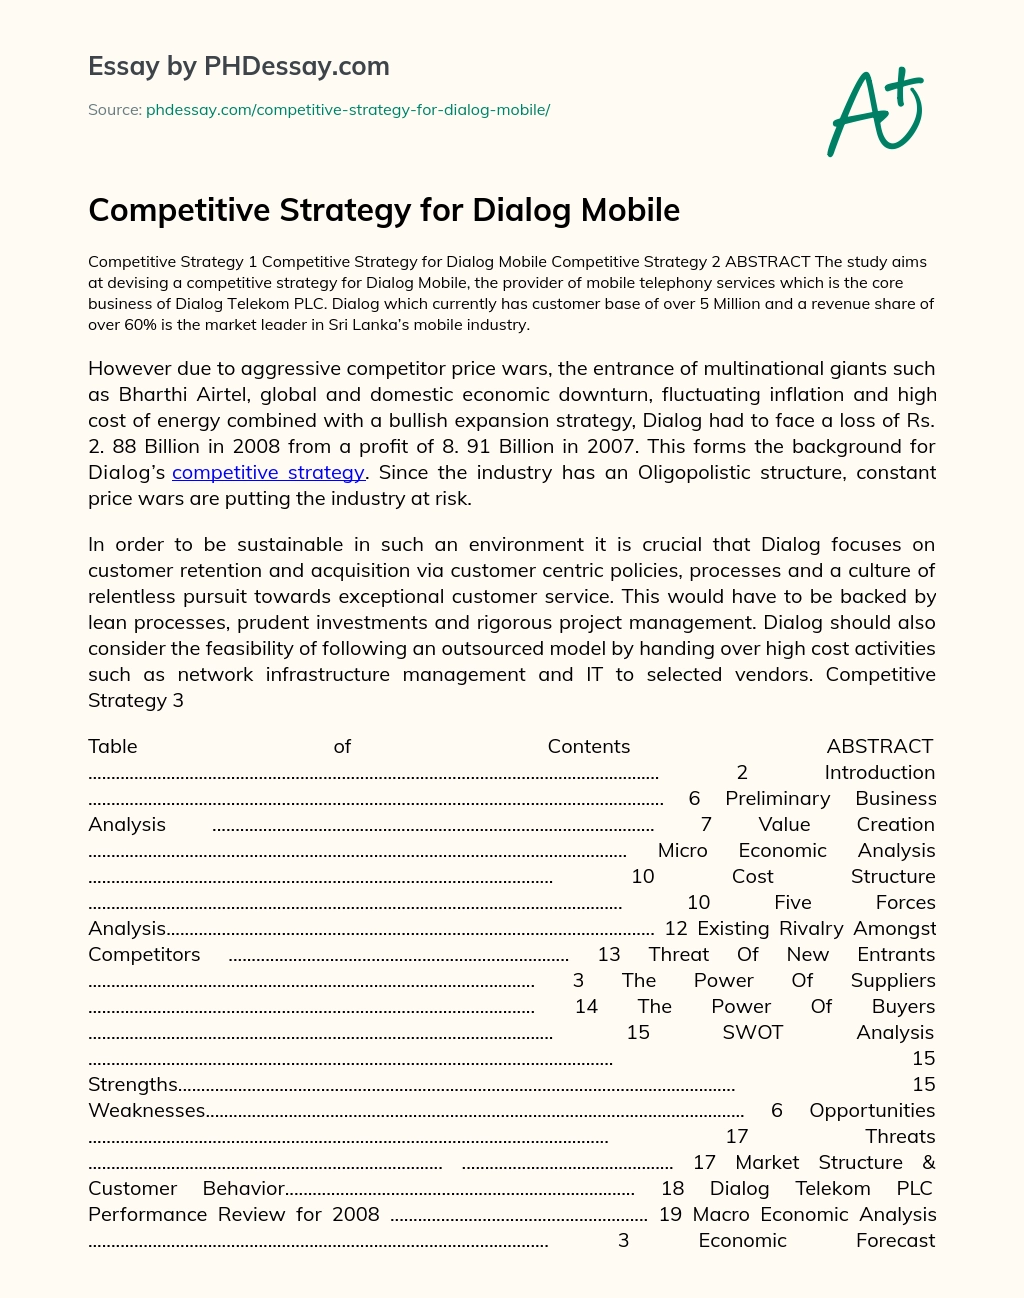 Competitive Strategy for Dialog Mobile essay